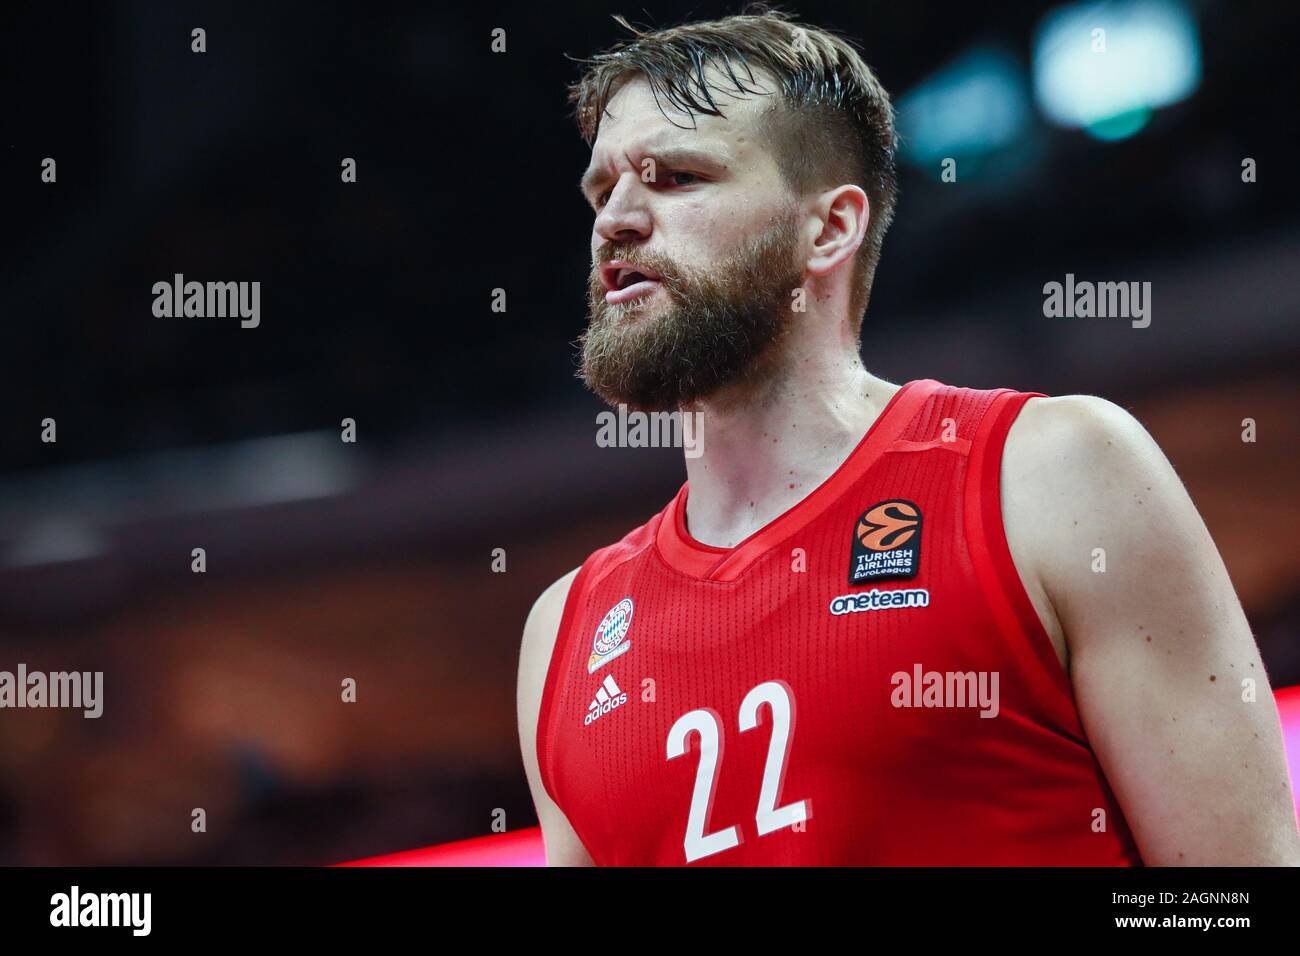 Berlin, Germany, December 18, 2019: Portrait of Danilo Barthel of FC Bayern Munich Basketball during the EuroLeague basketball game Stock Photo